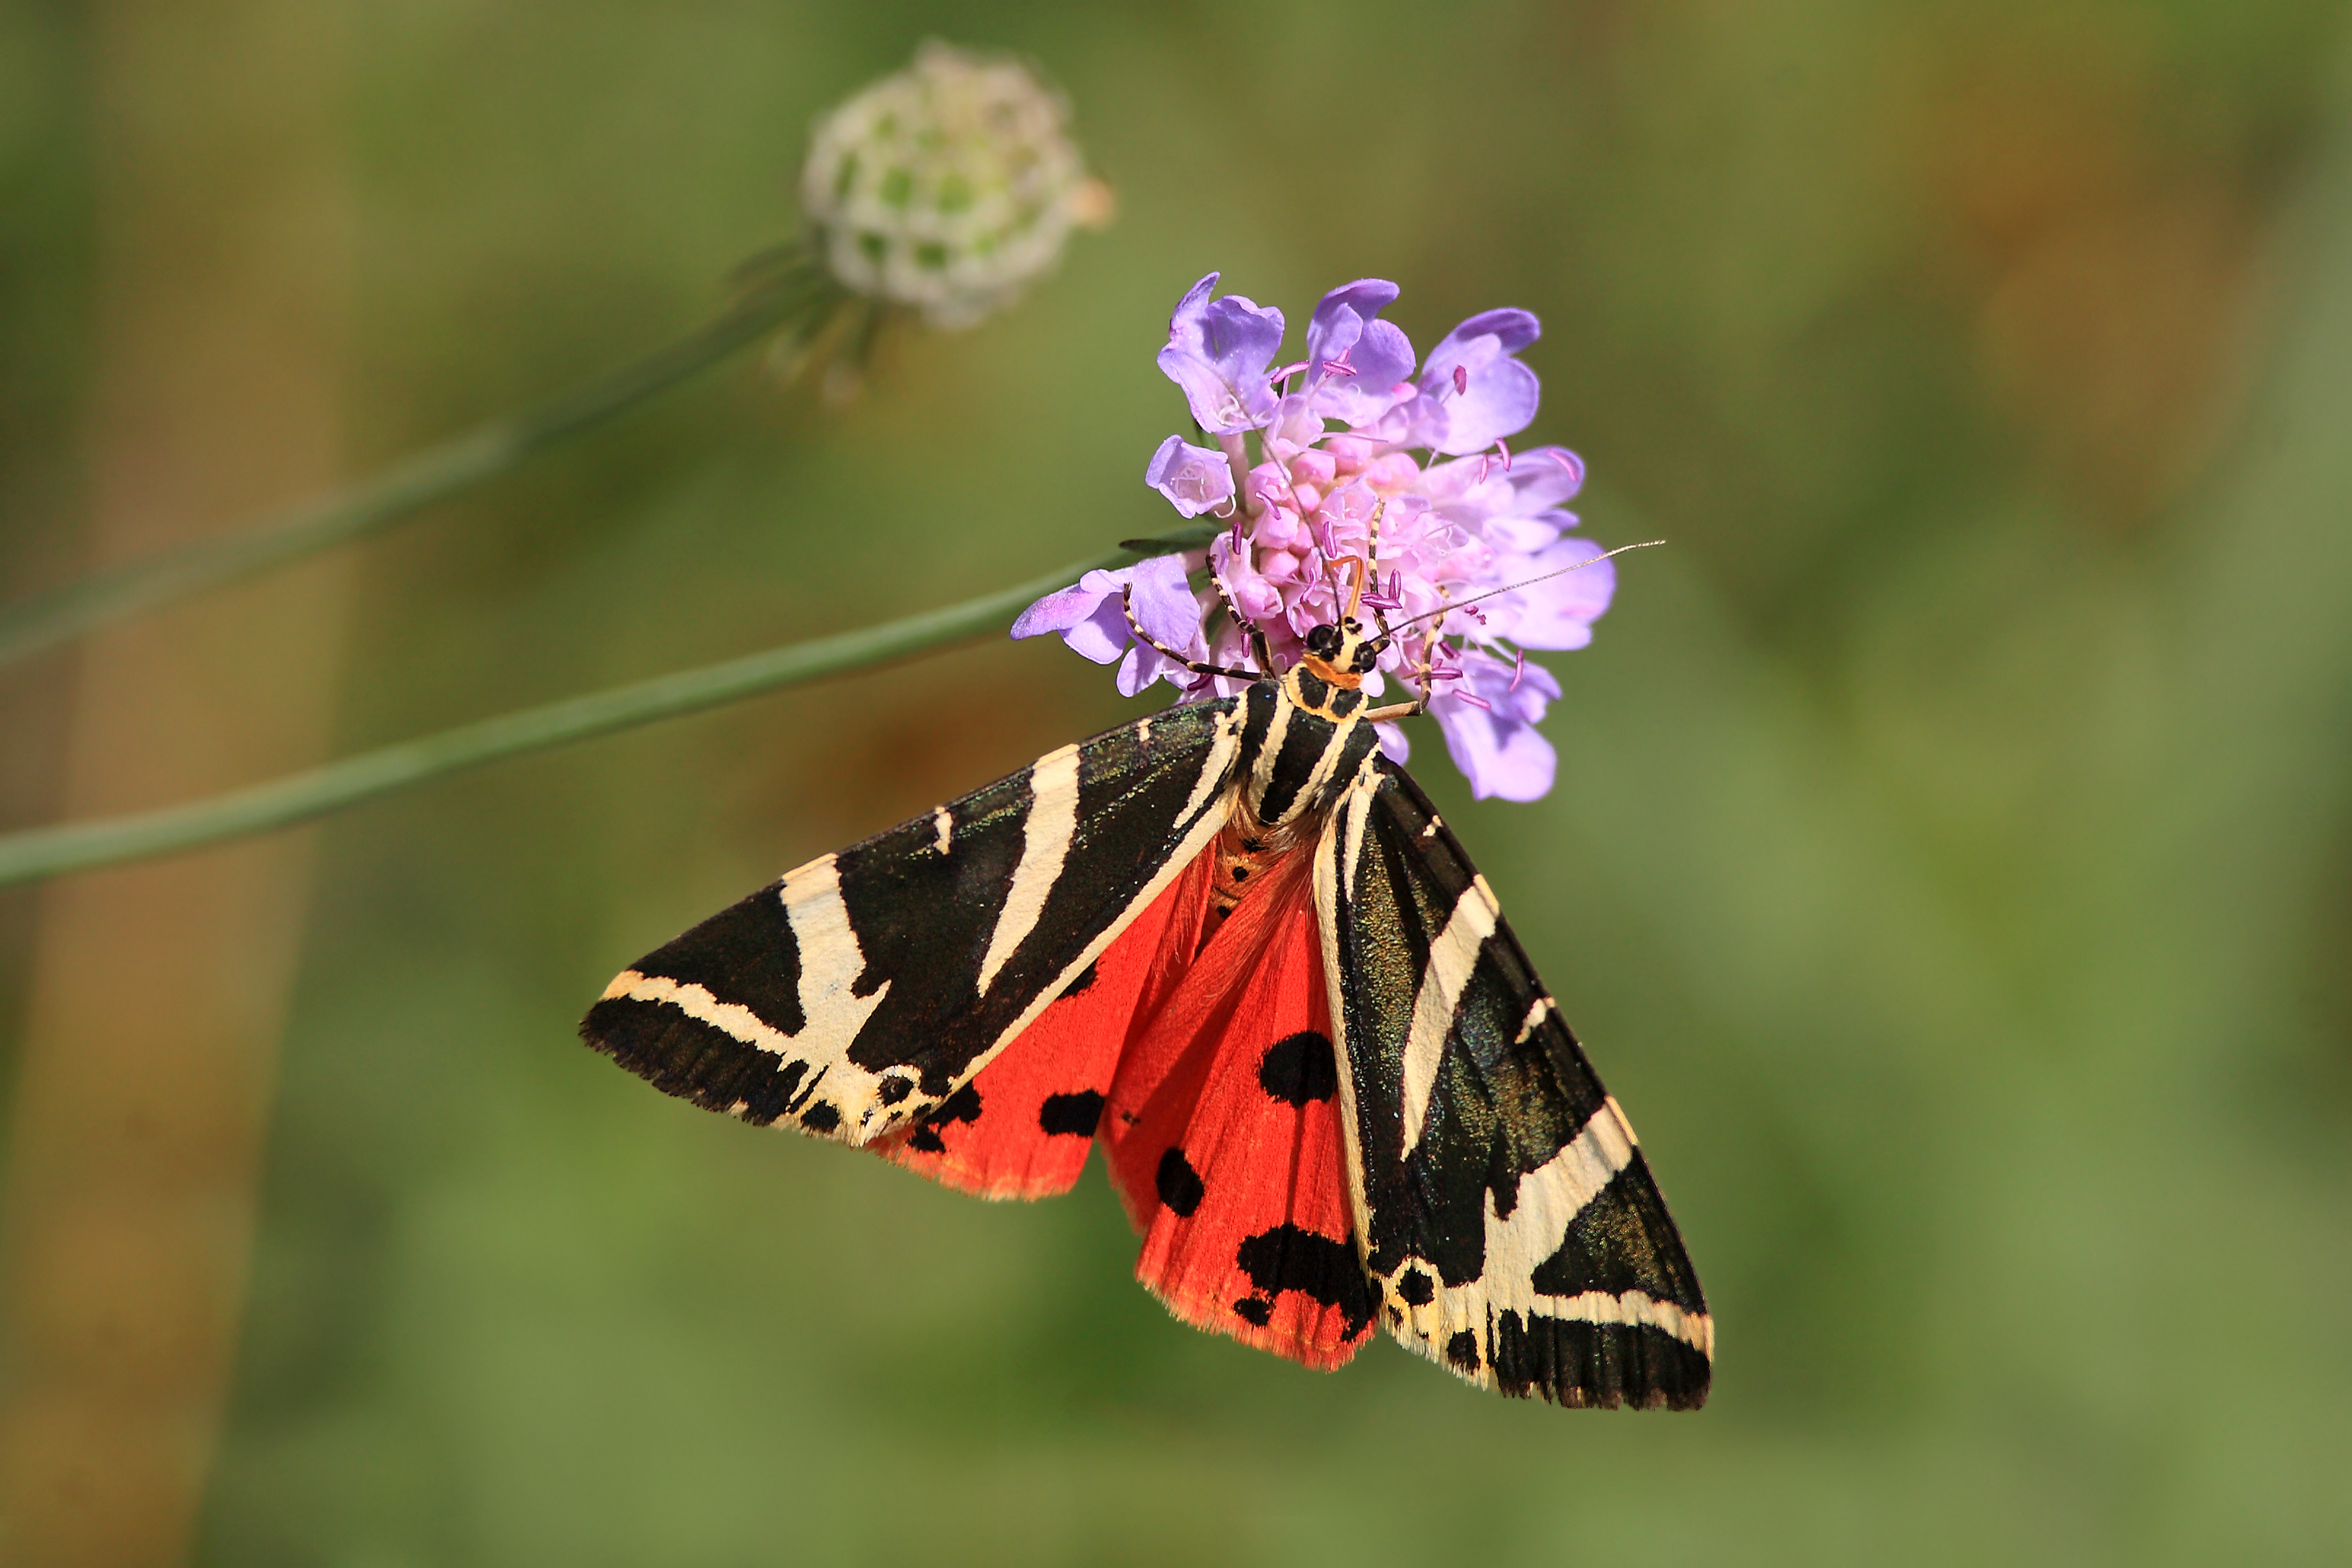 A black and cream winged Jersey tiger moth, with wings open to show red and black dotted underwings, feeding on a purple flower